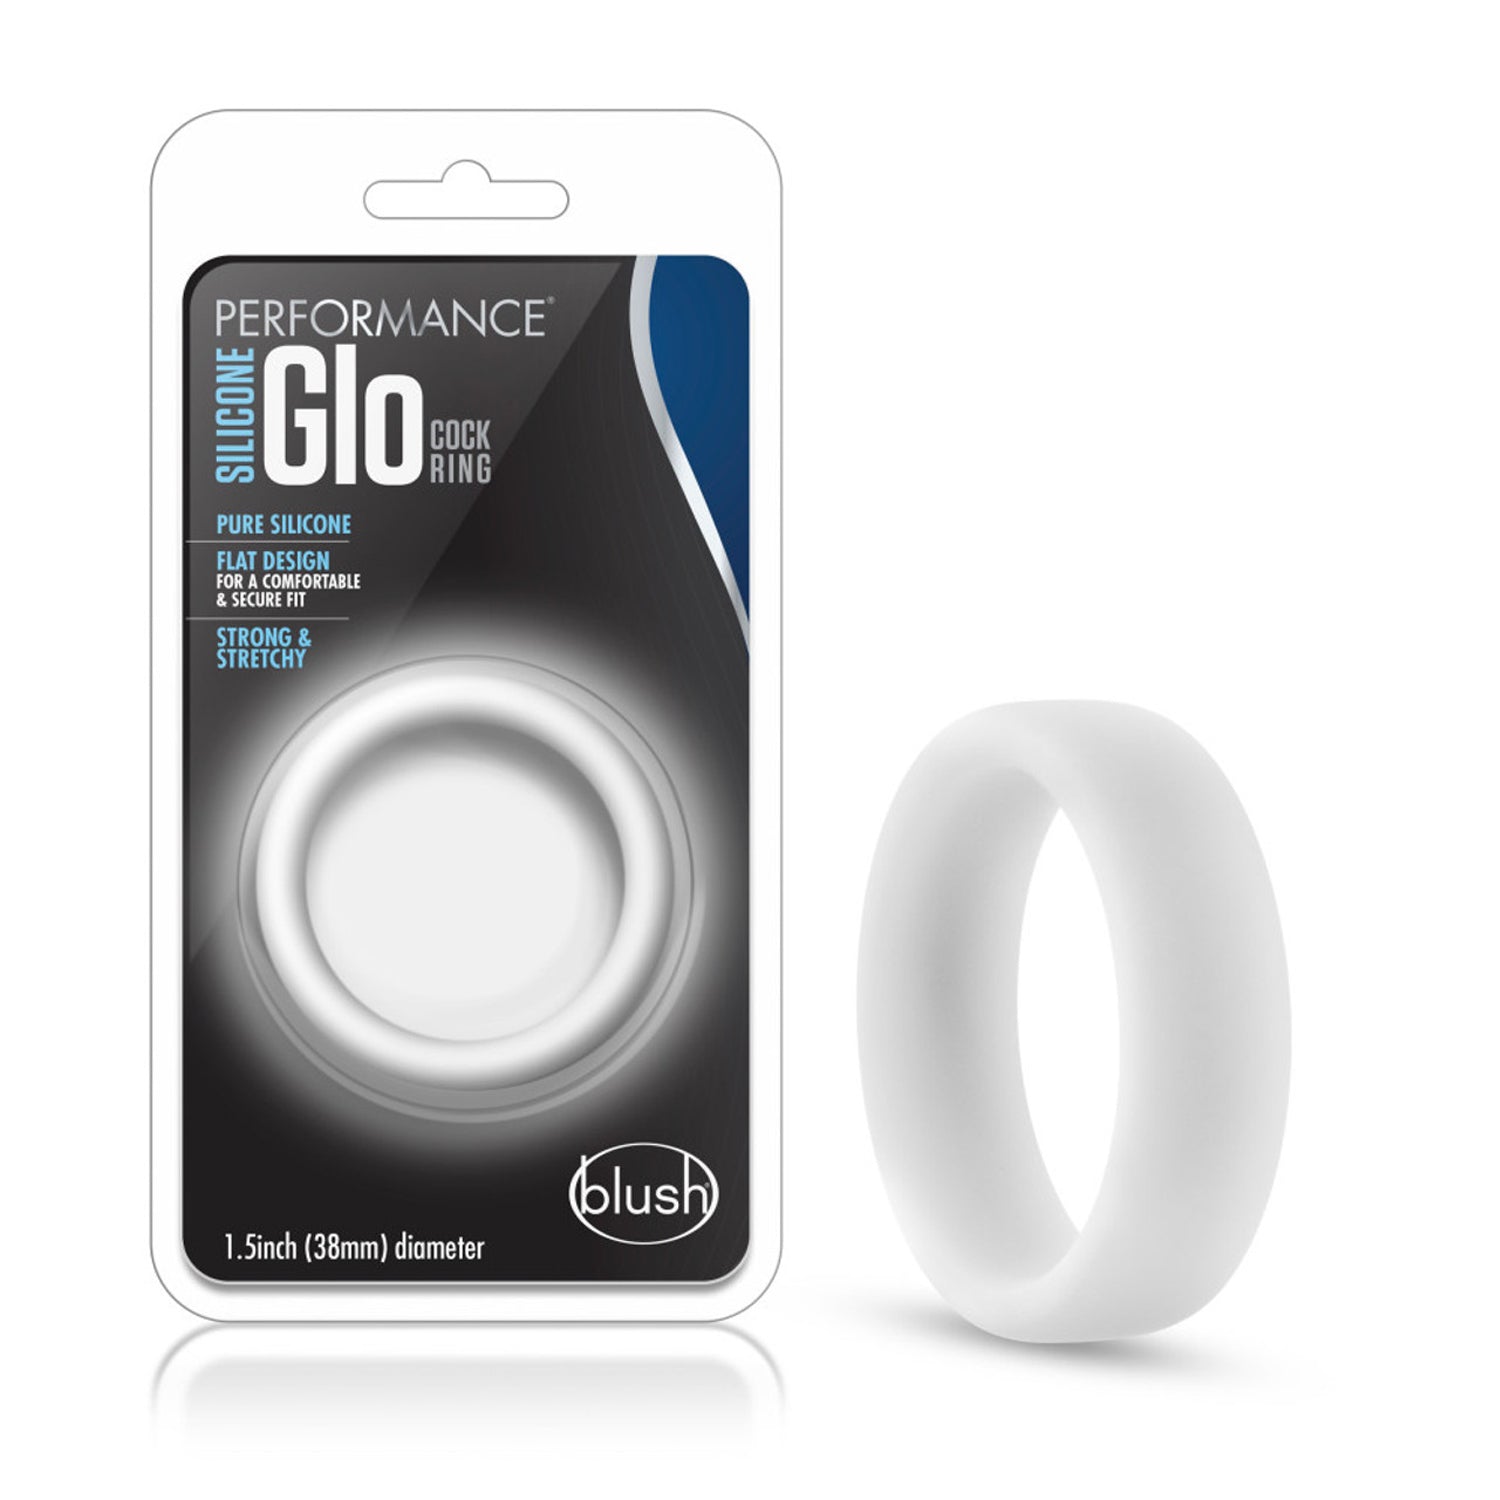 On the left side of the image is the product packaging. On the packaging is the Performance logo, product name: Silicone Glo Cock Ring, product features: Pure silicone; Flat design for a comfortable & secure fit; strong & stretchy, the product inside visible through clear packaging, "1.5inch (38mm) diameter, and the blush logo in the bottom right. Beside the packaging is the product blush Performance Silicone white Glo Blue Cock Ring.